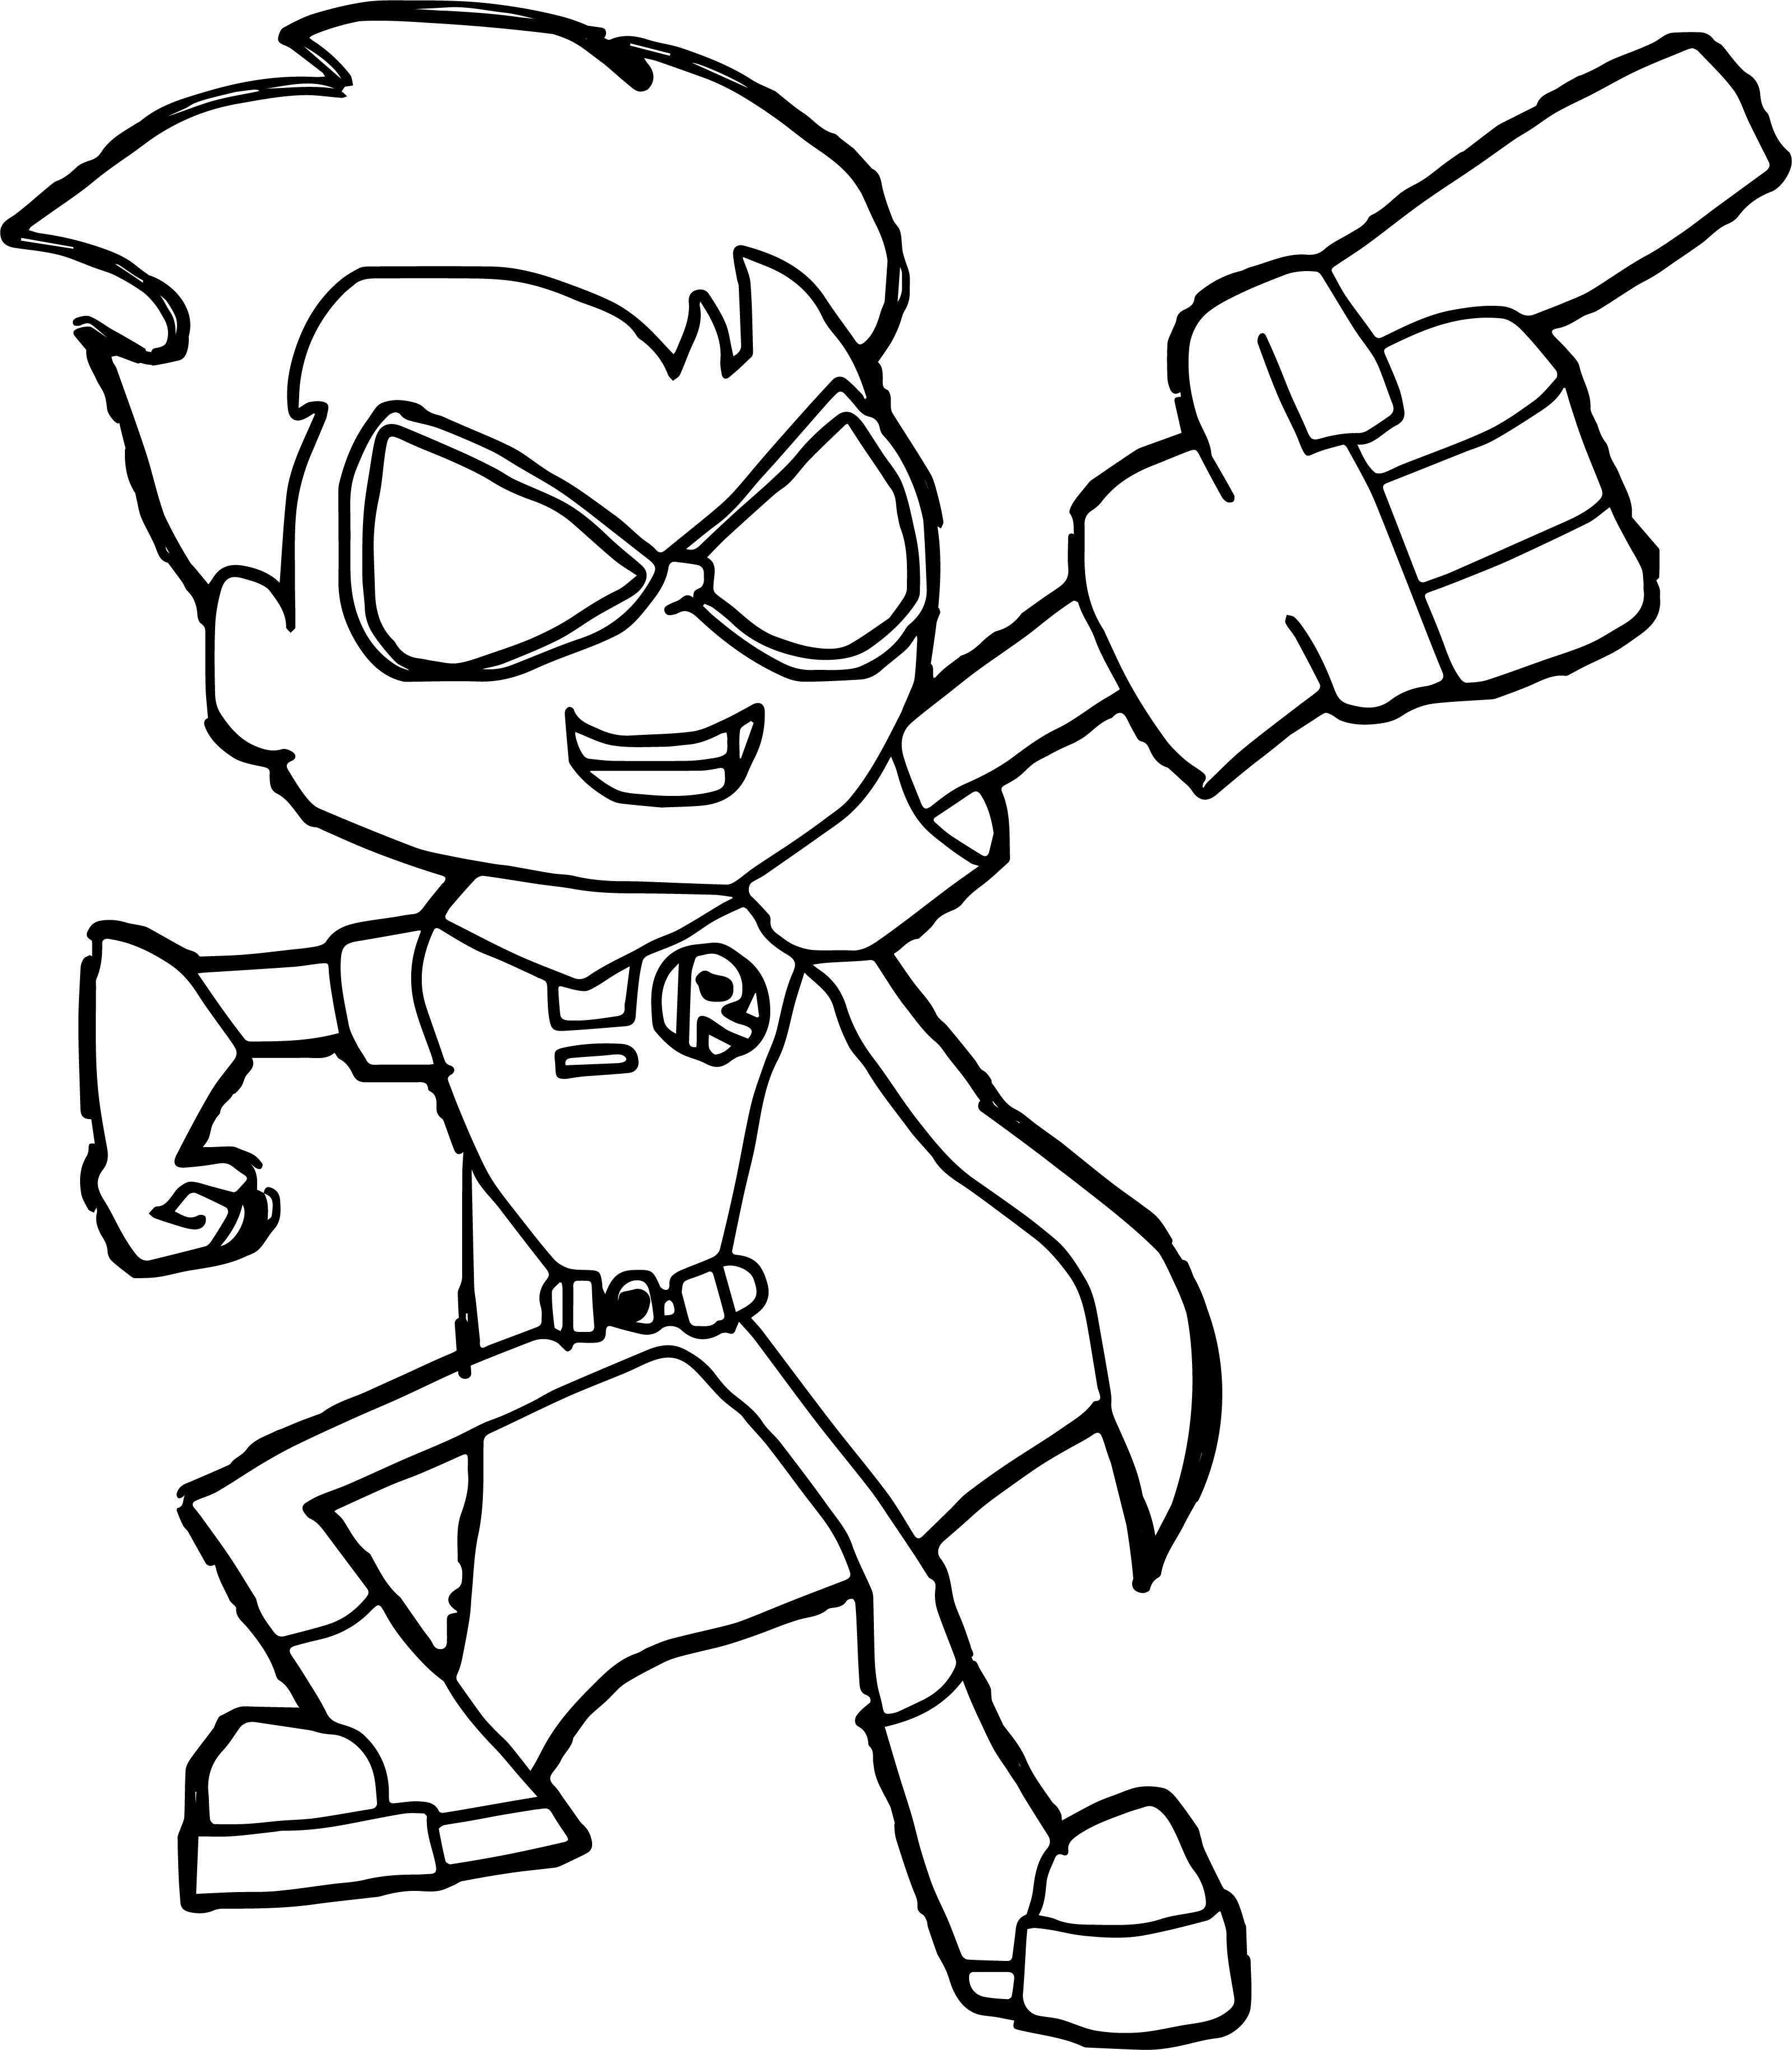 Teen Titans Go Coloring Pages
 New Teen Titans Go Coloring Page – advance thun